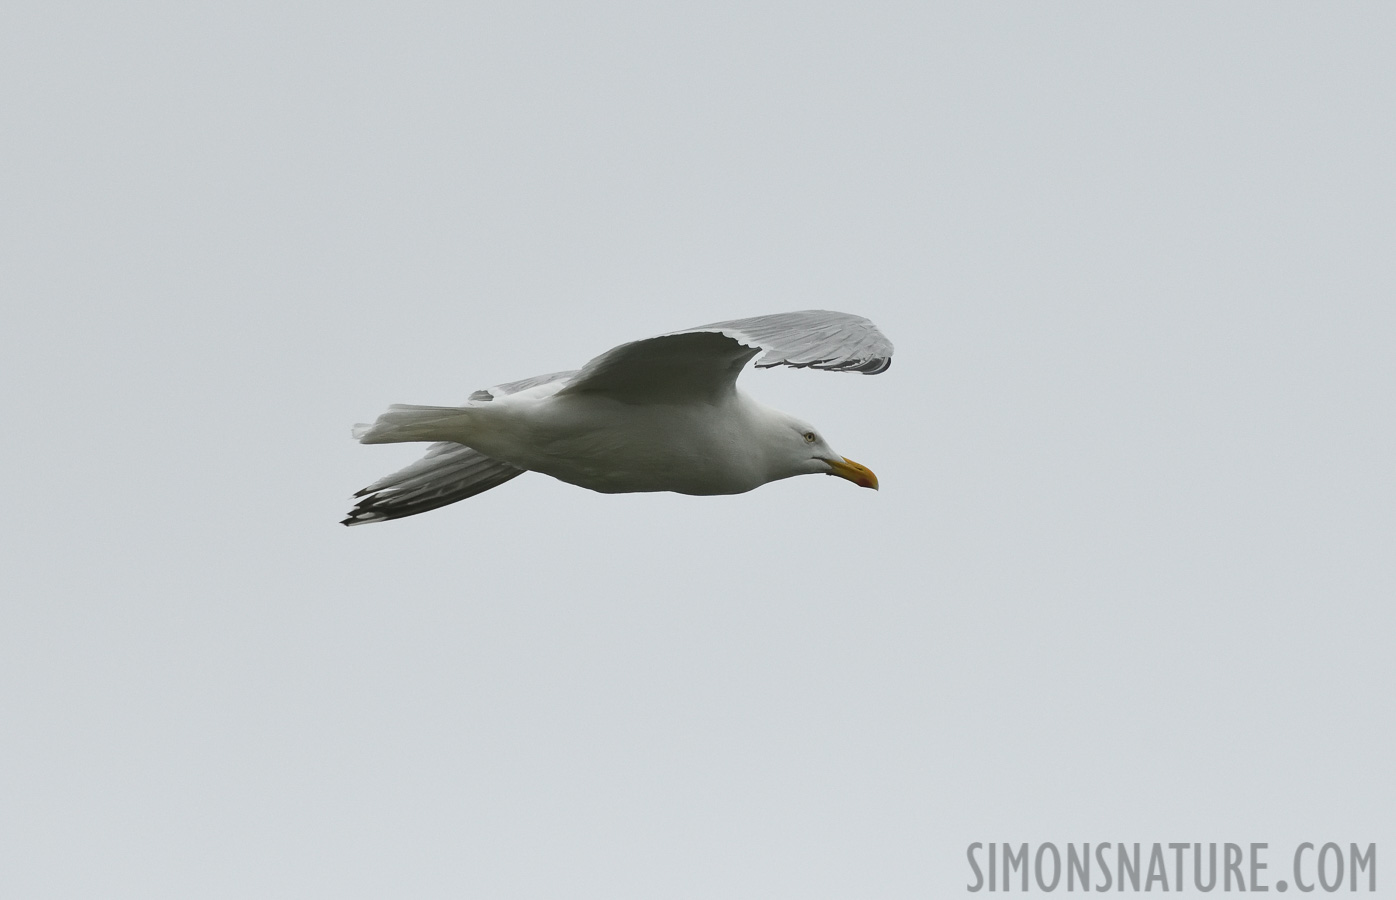 Larus glaucoides kumlieni [400 mm, 1/4000 sec at f / 8.0, ISO 1600]